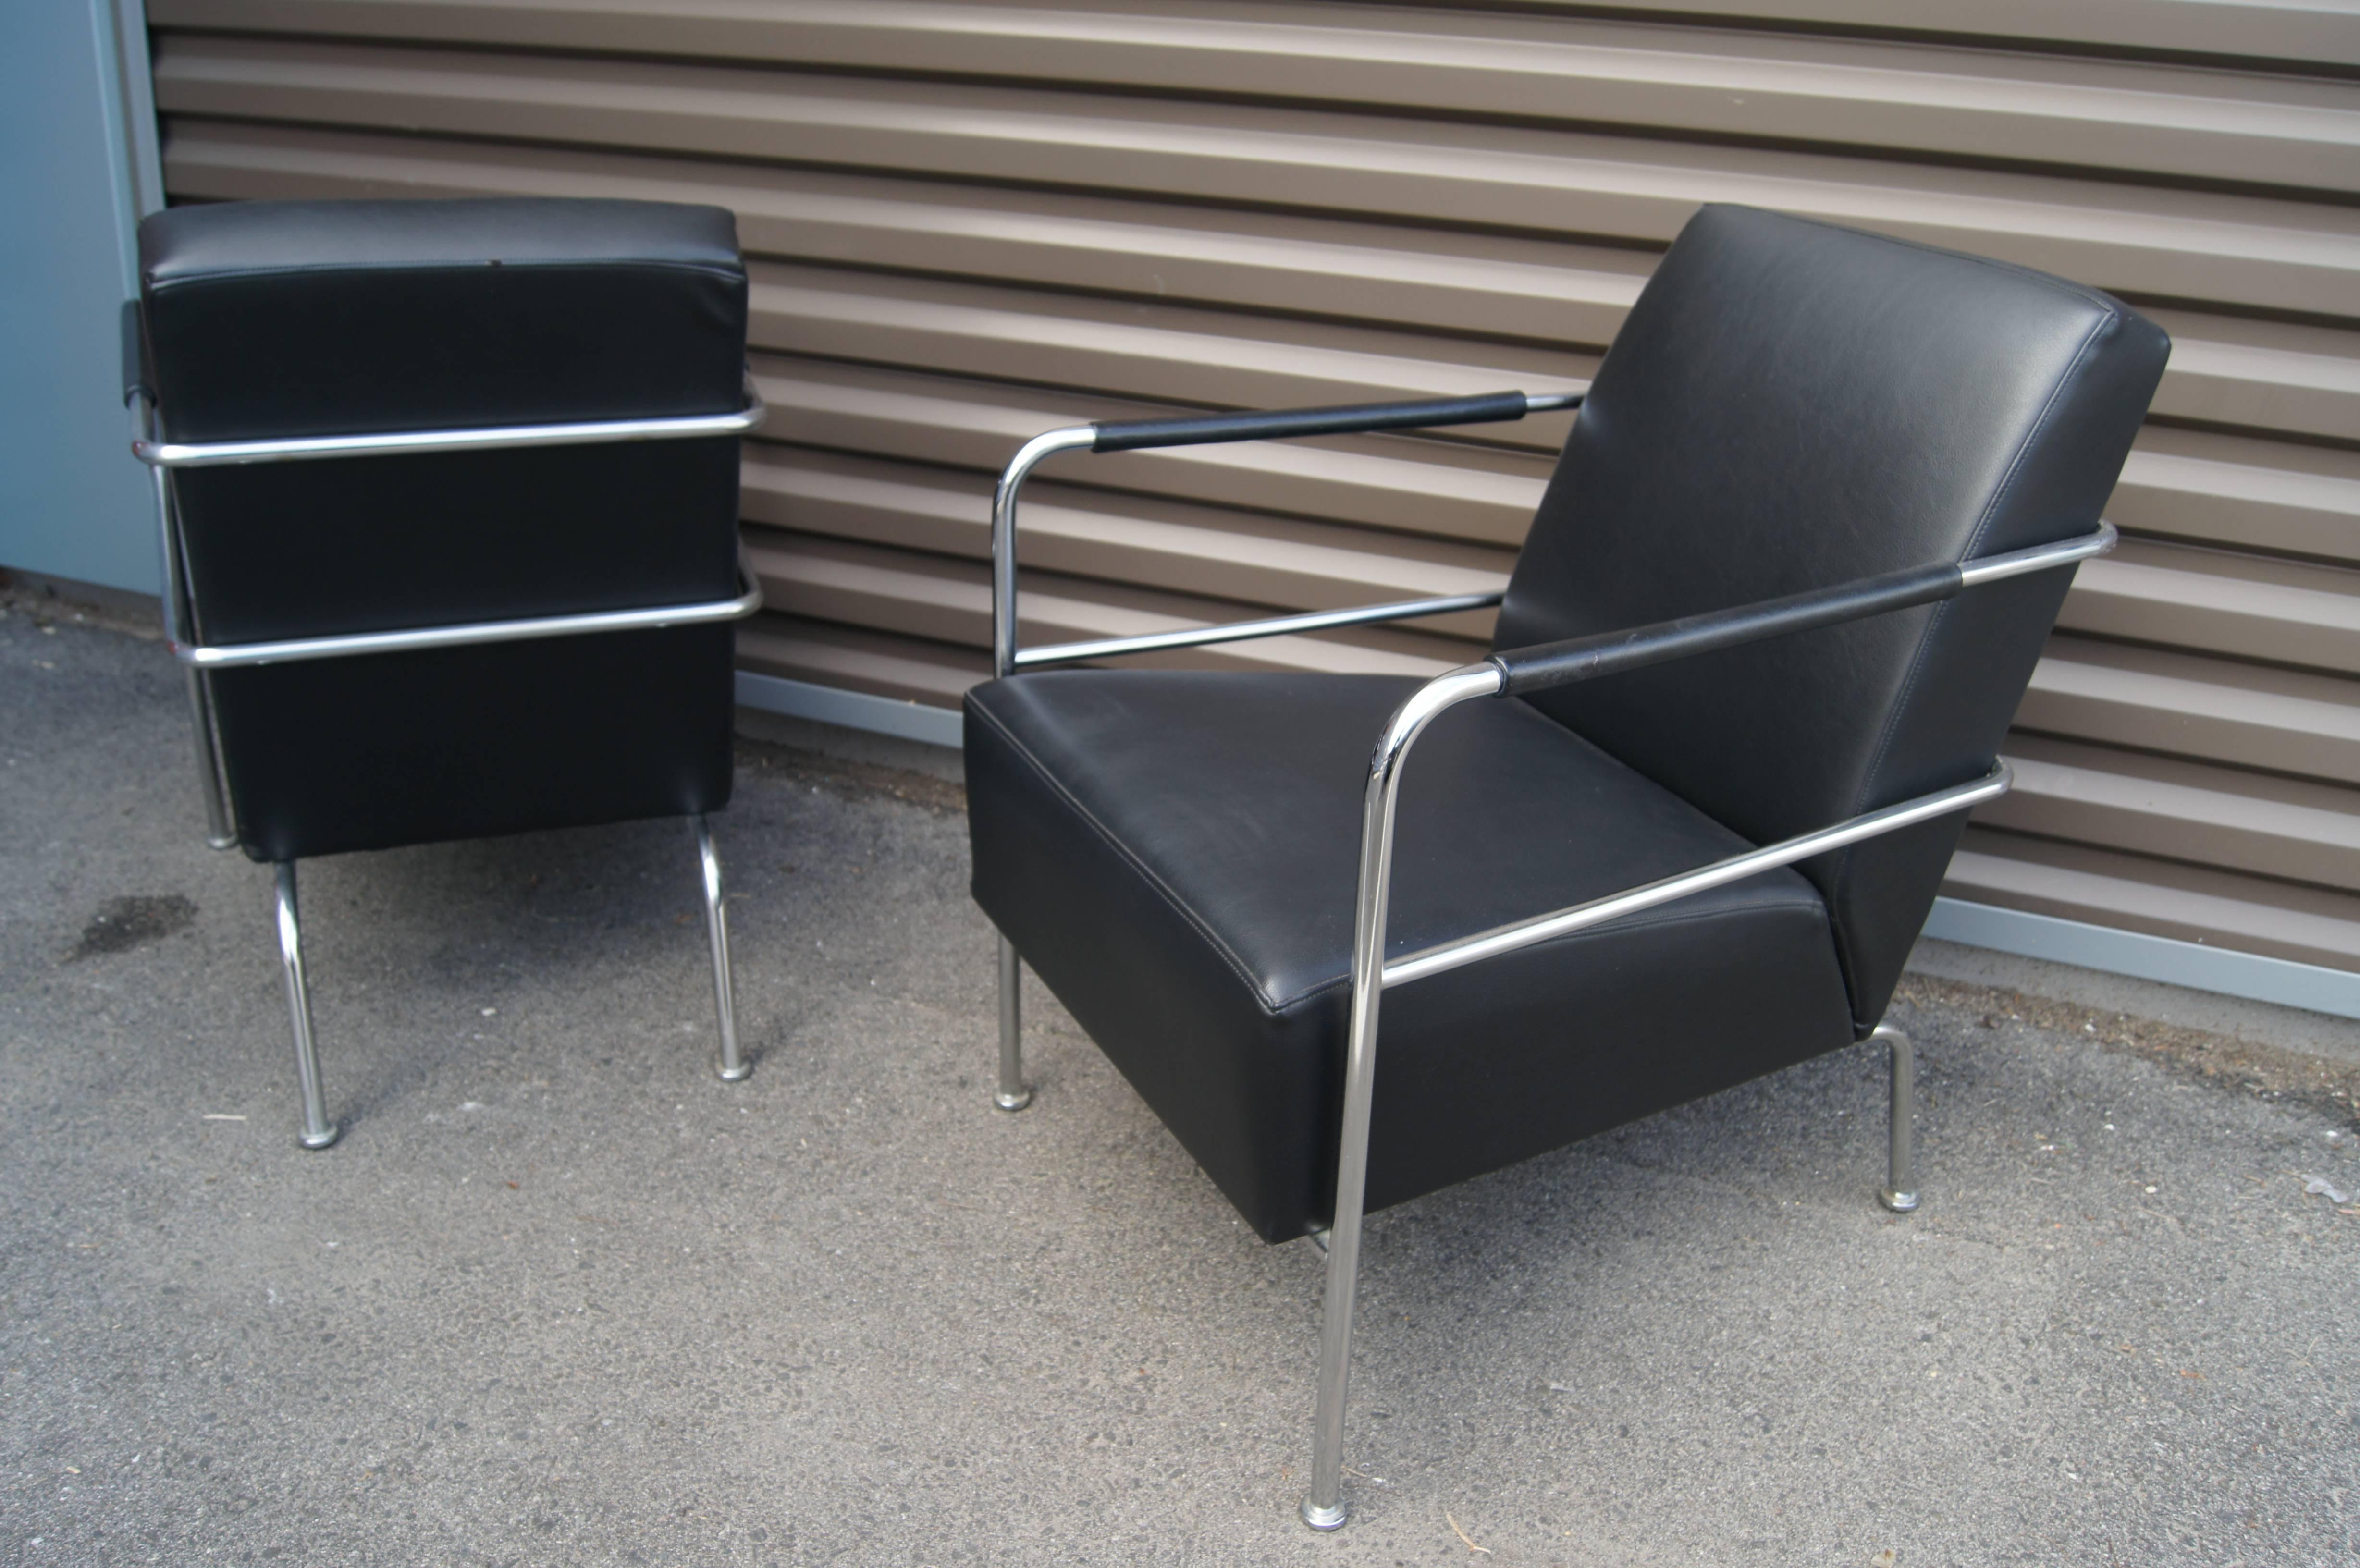 Gunilla Allard's cinema chair for Lammhults offers deep comfort in an elegantly minimal design. The chrome-plated tubular steel frame features leather-covered armrests; the ample cushioning is snugly upholstered in soft black leather. 

Two chairs